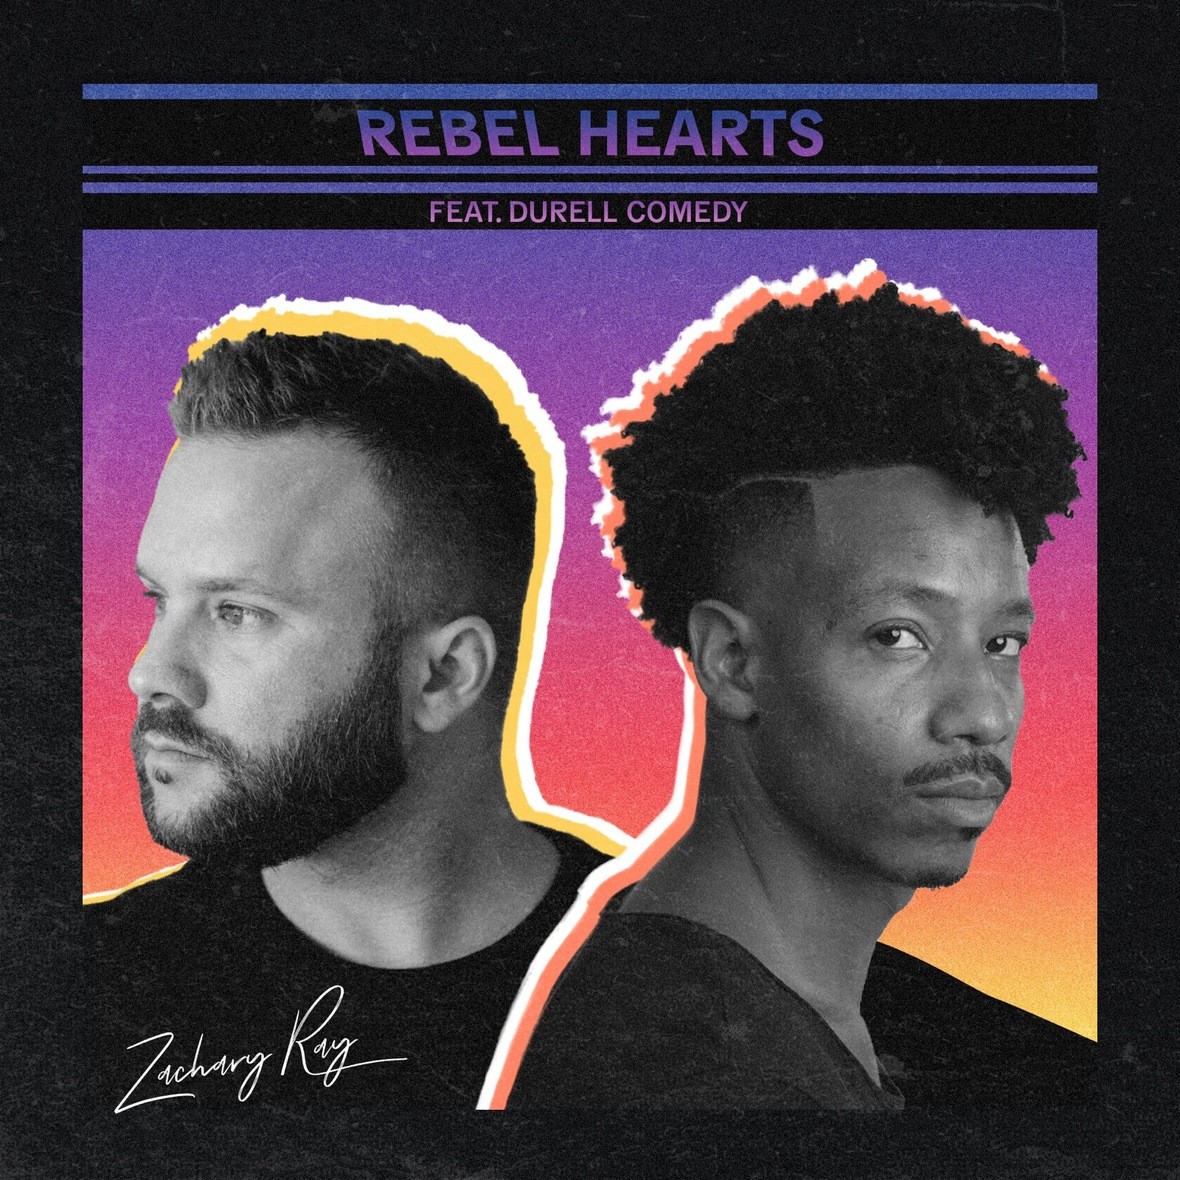 ZACHARY RAY RELEASES NEW VERSION OF ‘REBEL HEARTS’